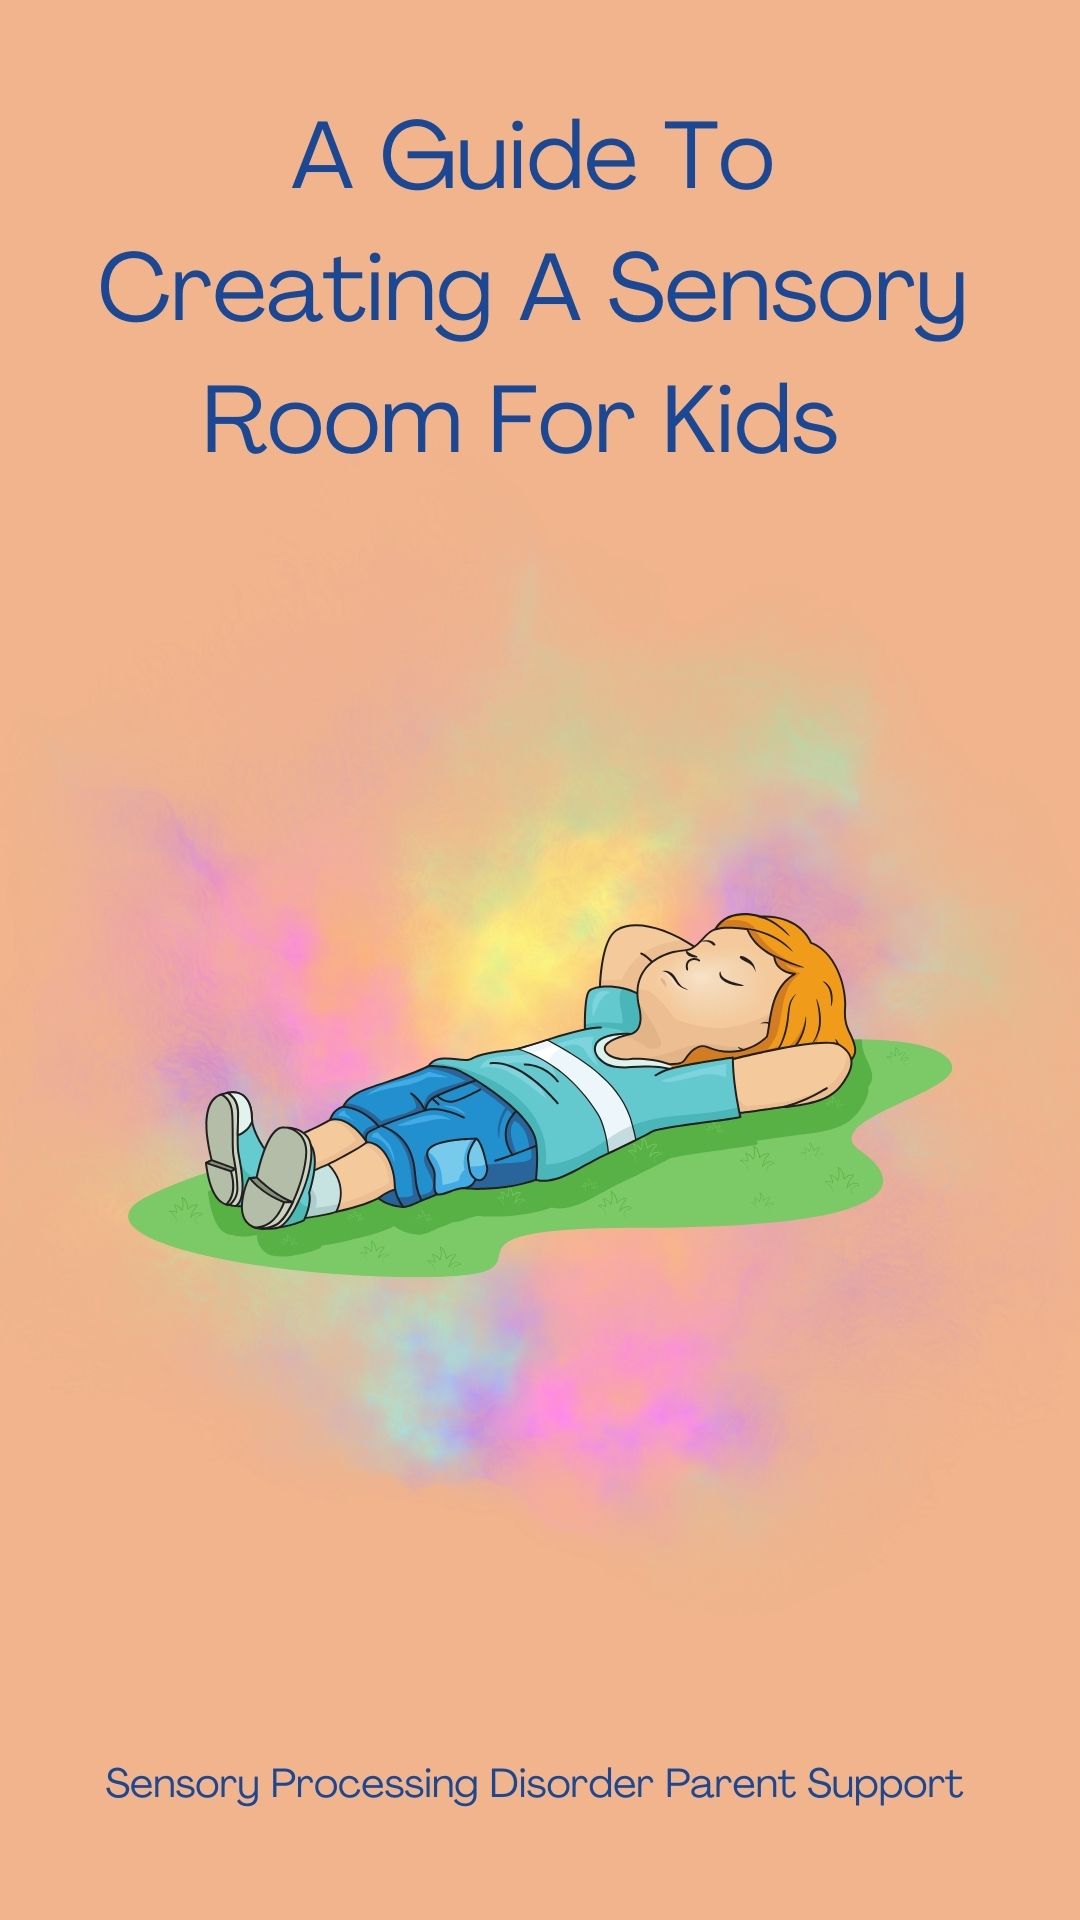 A Guide To Creating A Sensory Room For Kids